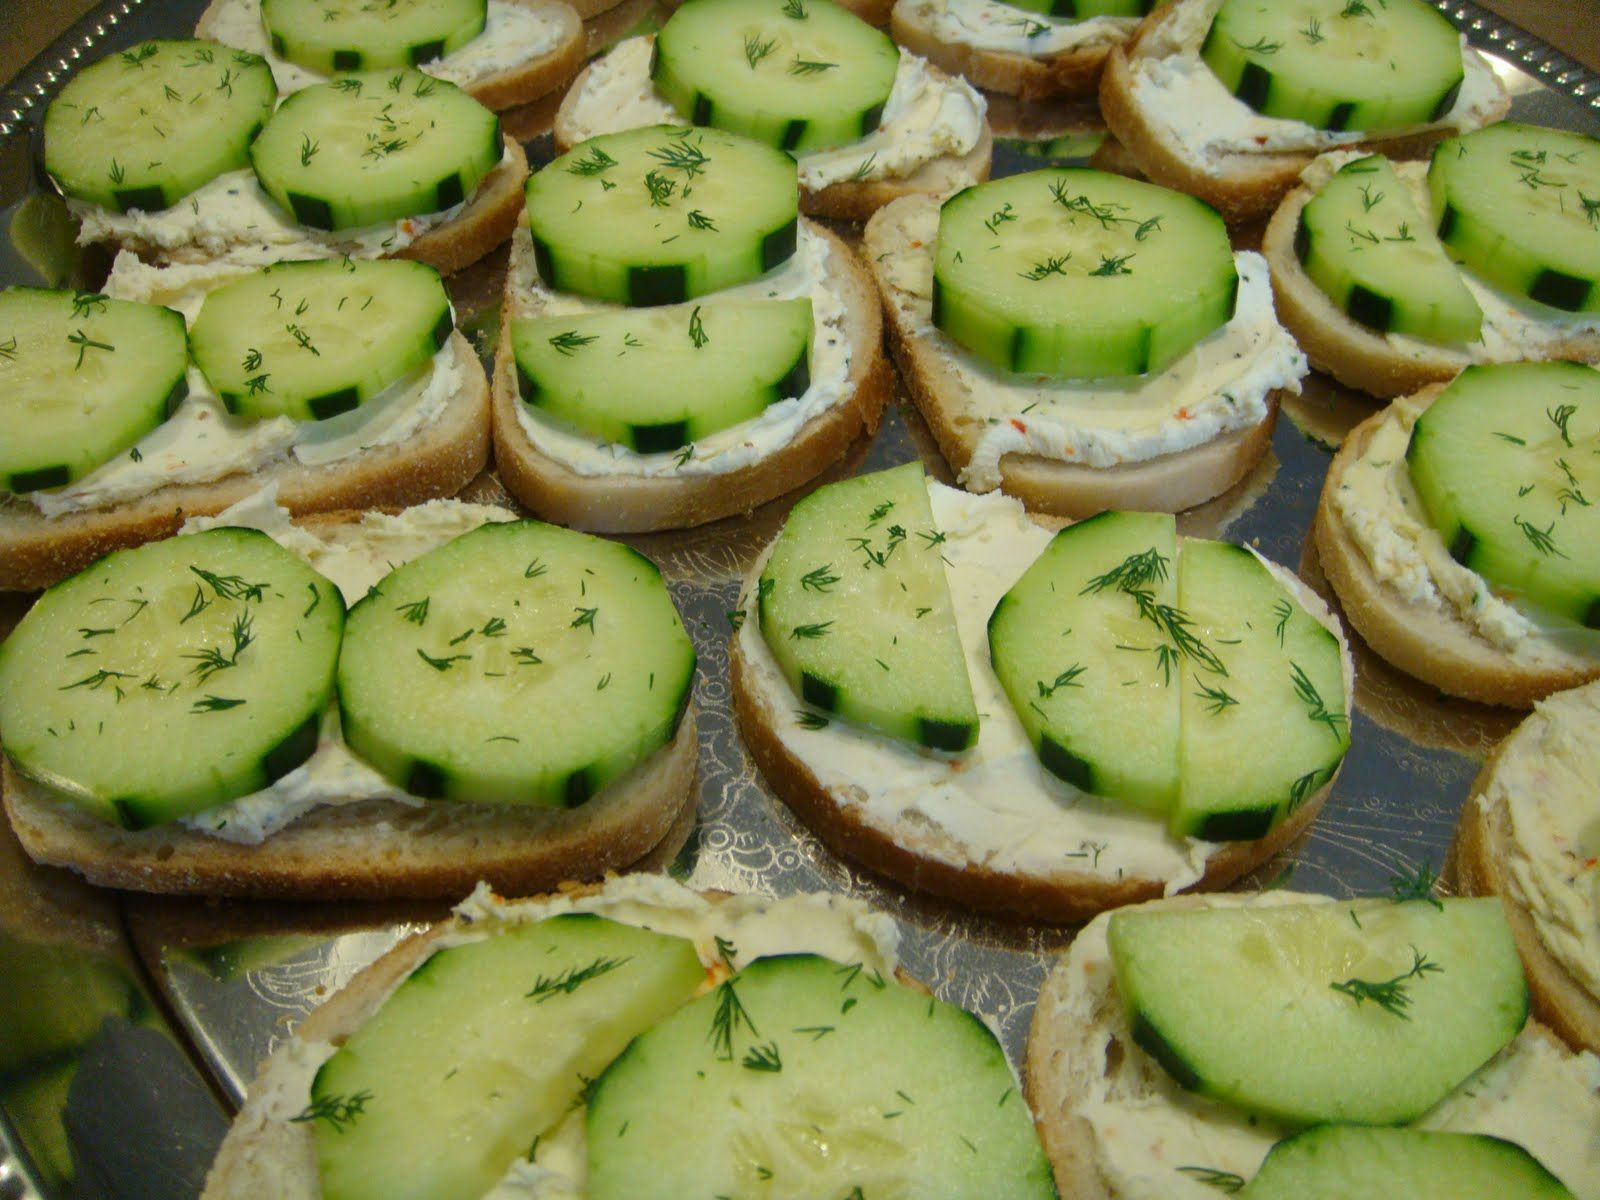 Cucumber Appetizers With Dill And Cream Cheese
 Cucumber Appetizer 8 oz cream cheese 1 pkg dry italian